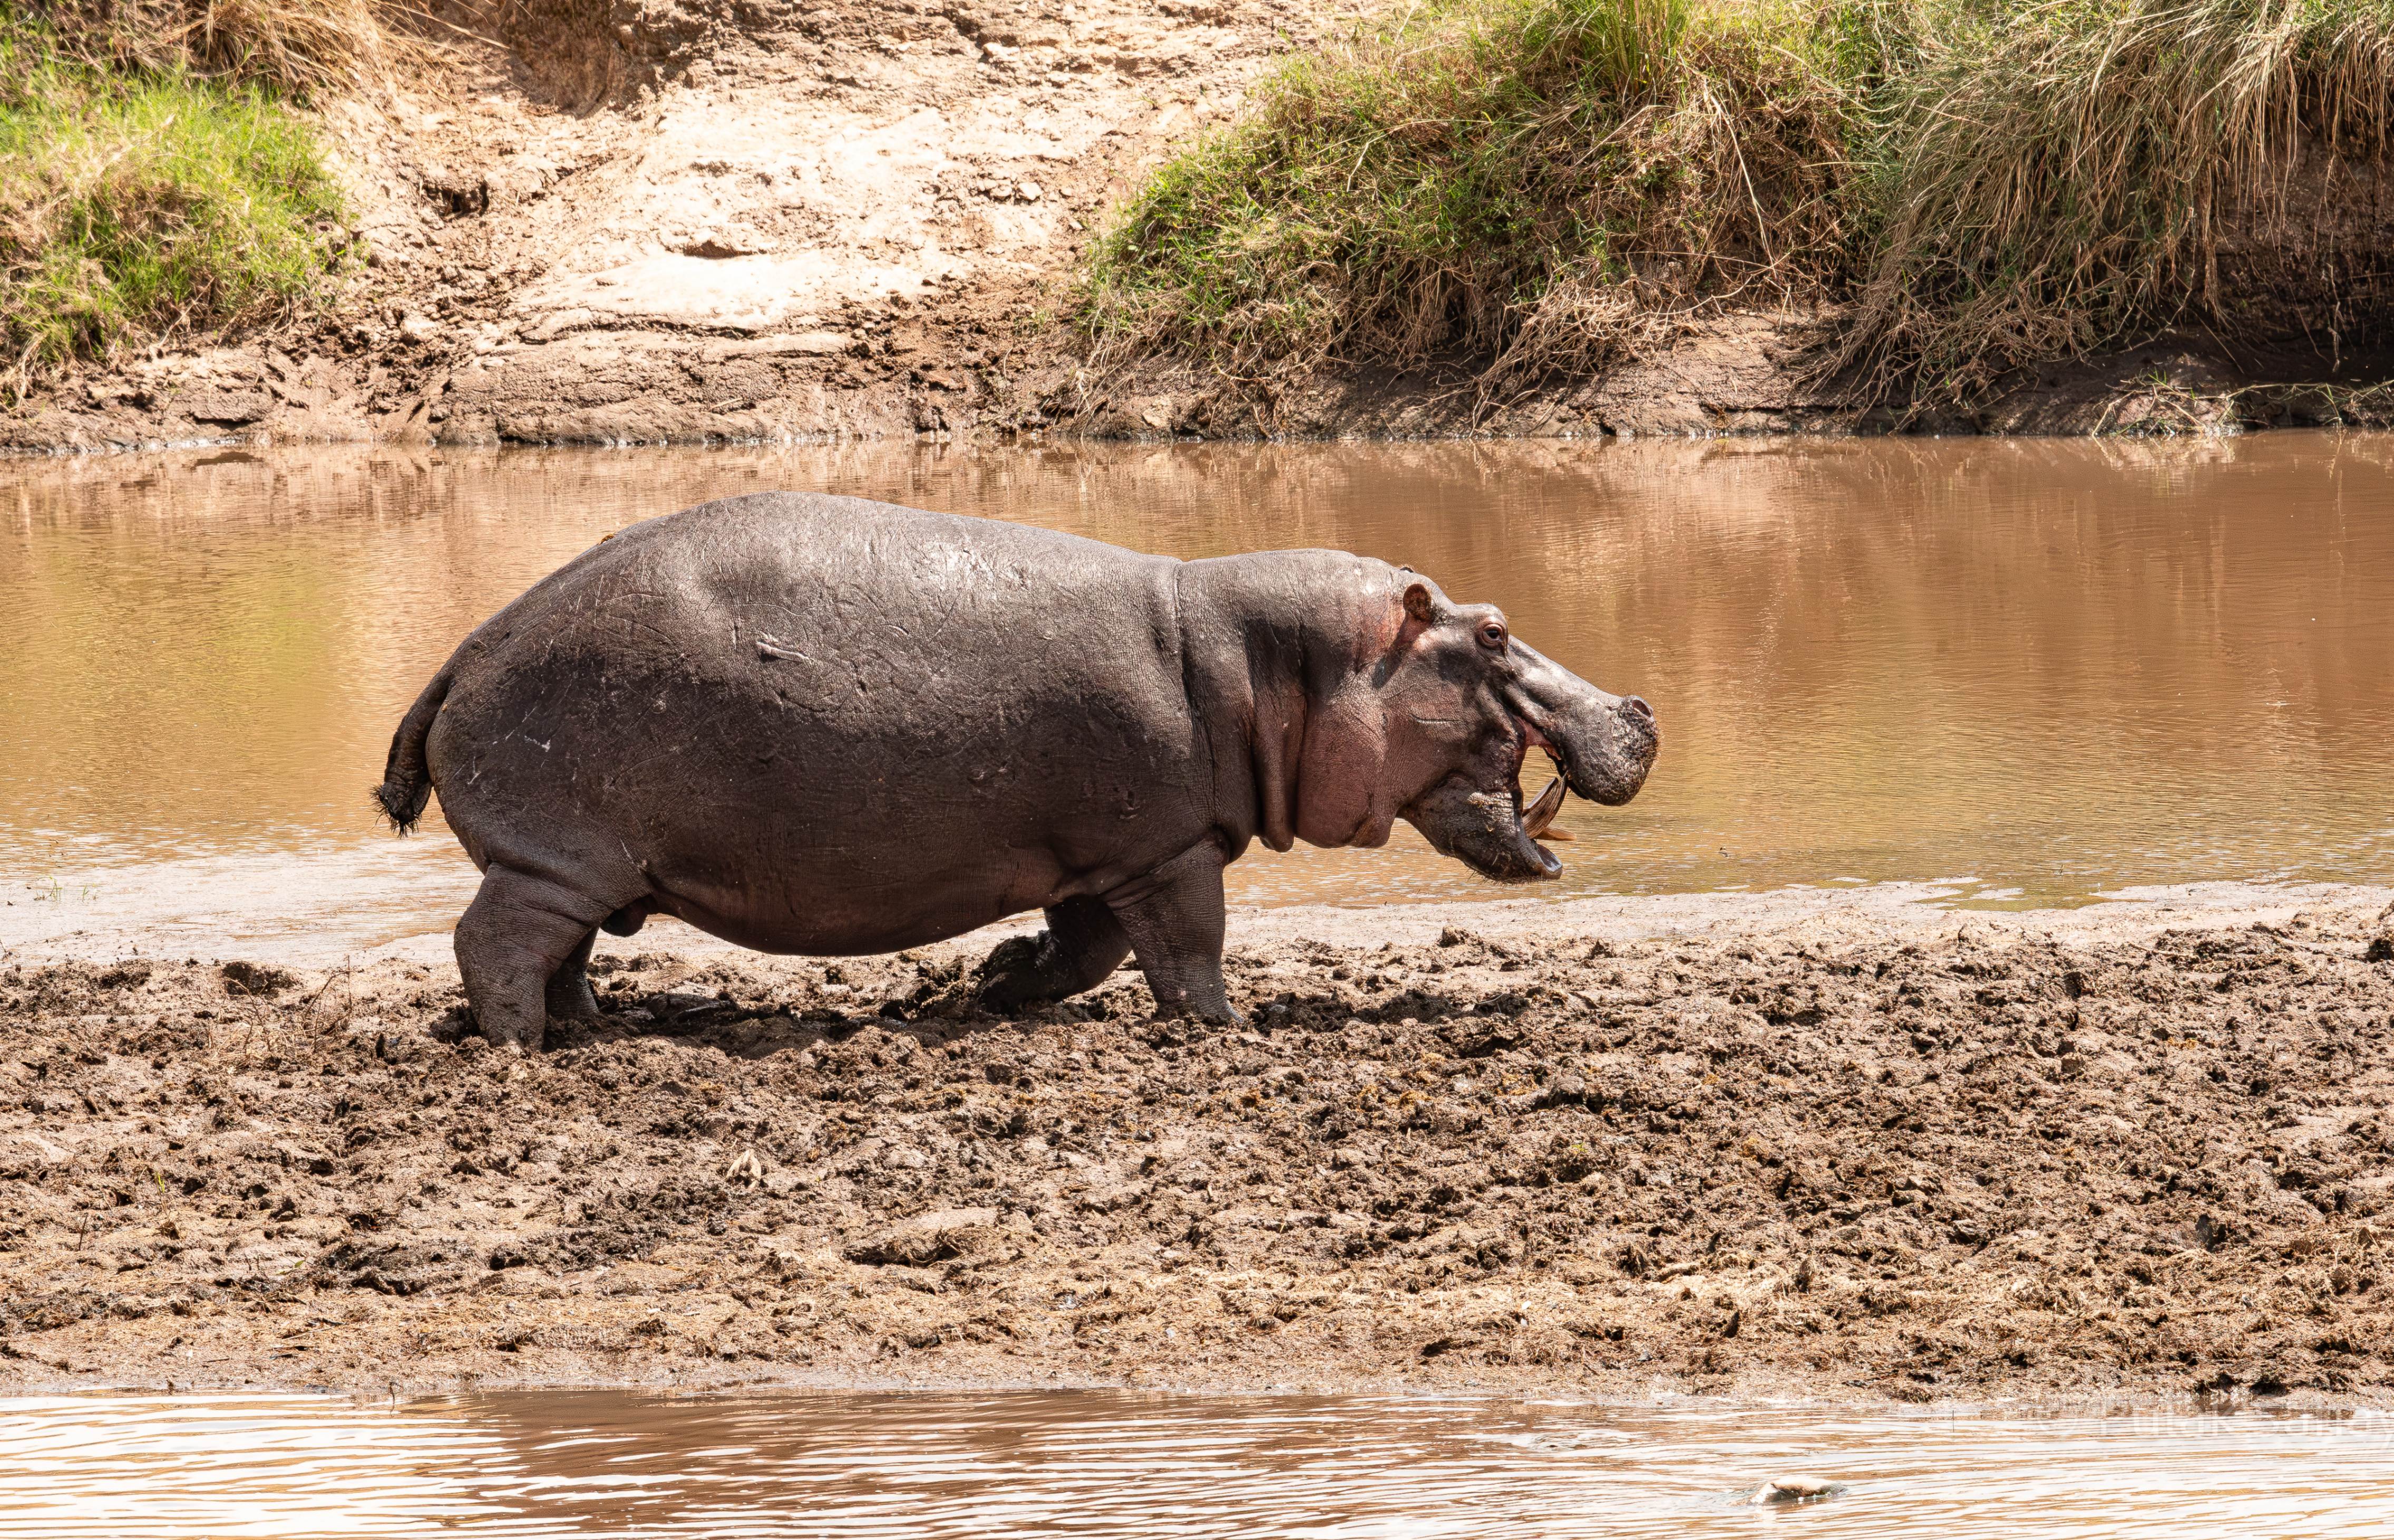 Hippo running to see off an intruder